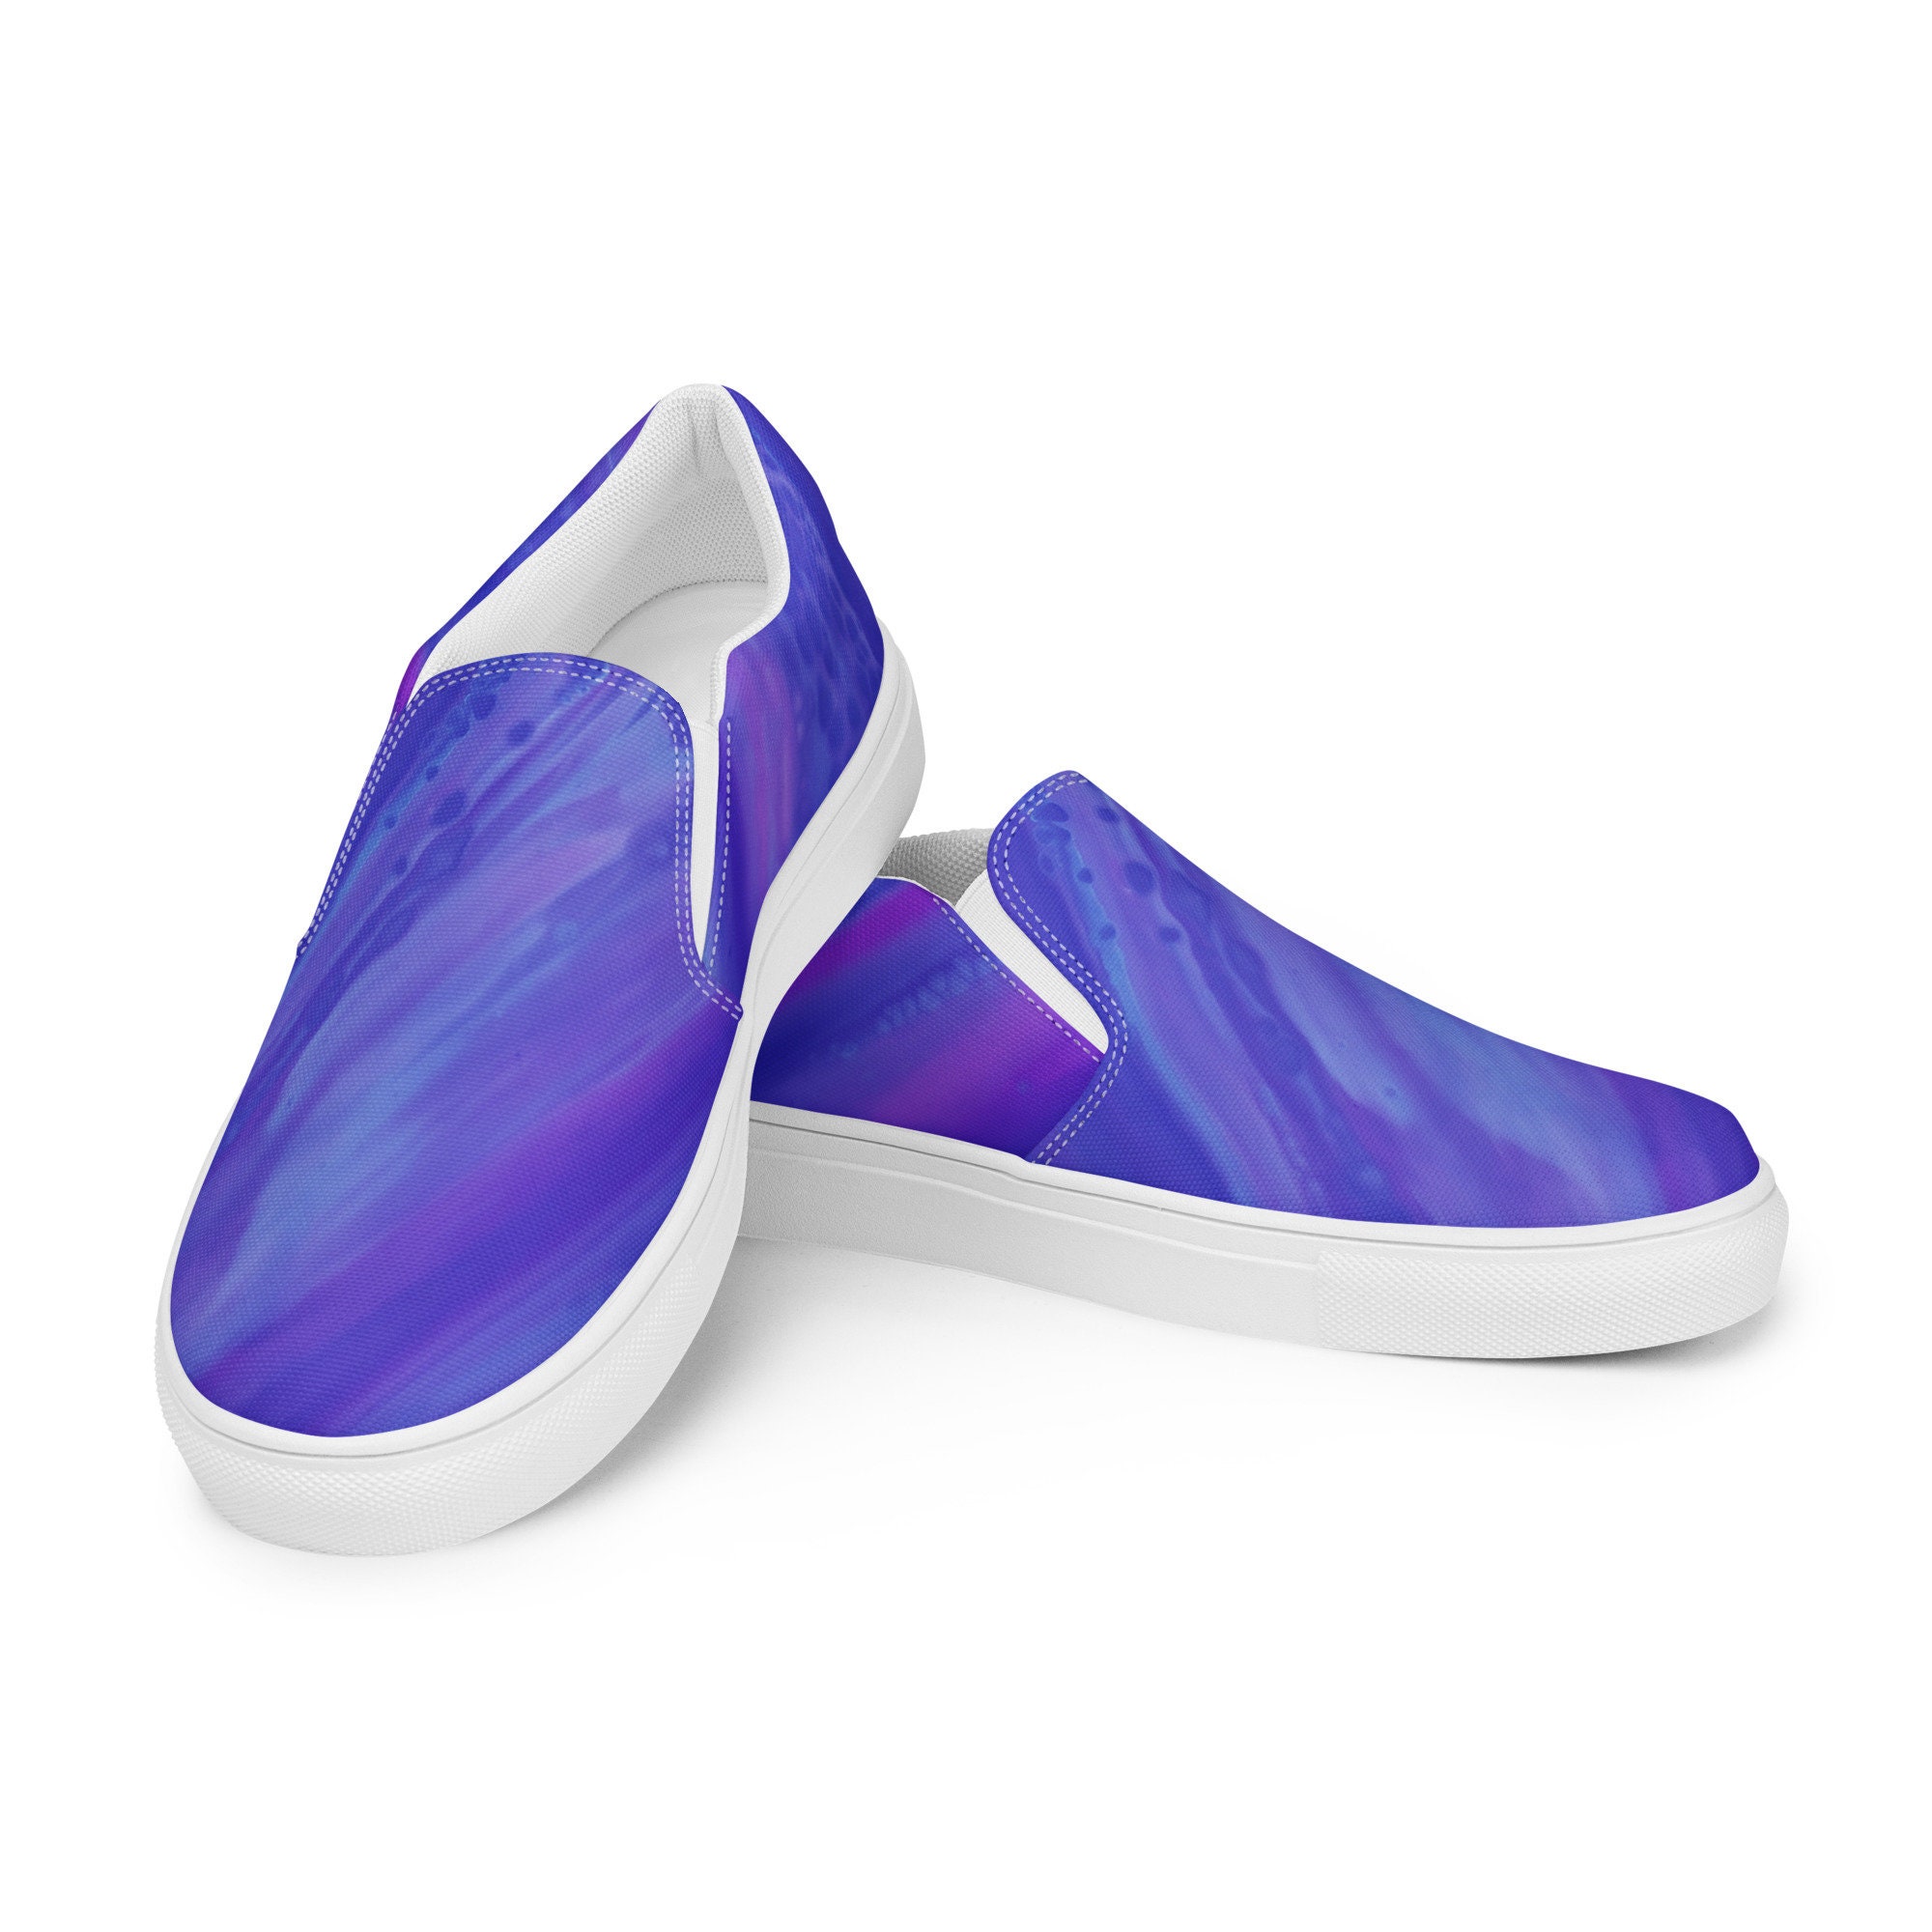 Discover Abstract Art Inspired Casual Slip On Shoes